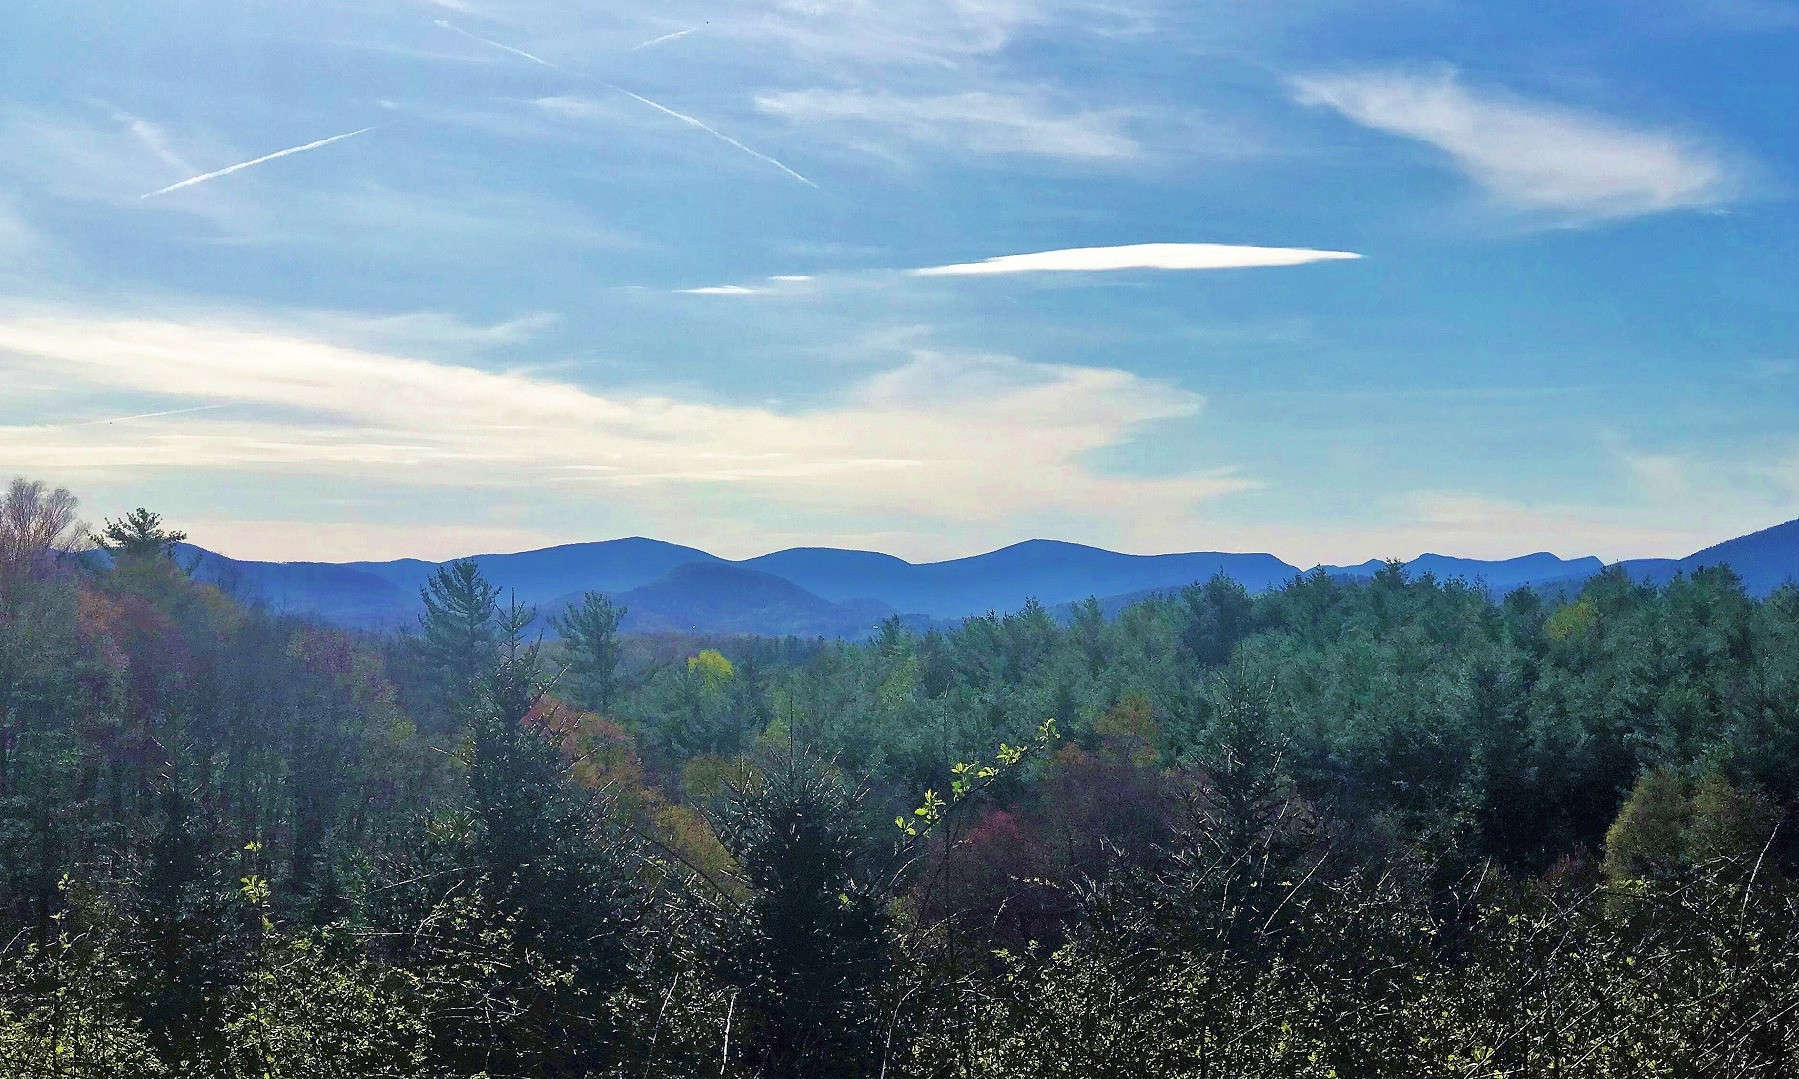 Looking for the ideal location to build your dream NC Mountain cabin or home? Take a look at this unrestricted 2.85 acre parcel with fabulous layered long range mountain views located just off the Blue Ridge Parkway in the Glendale Springs area of Ashe County.